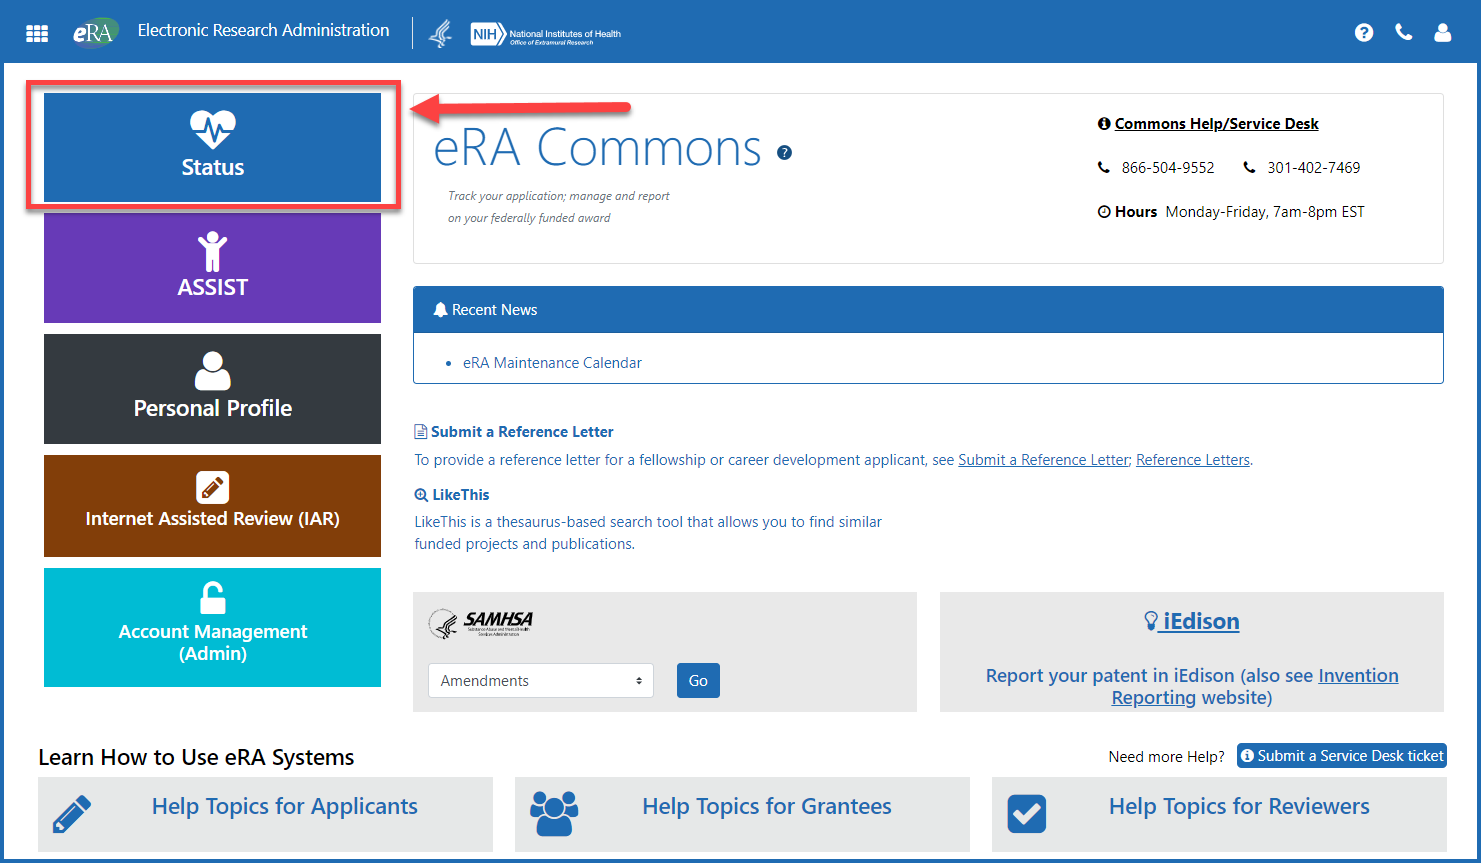 The Status button on the eRA Commons landing page